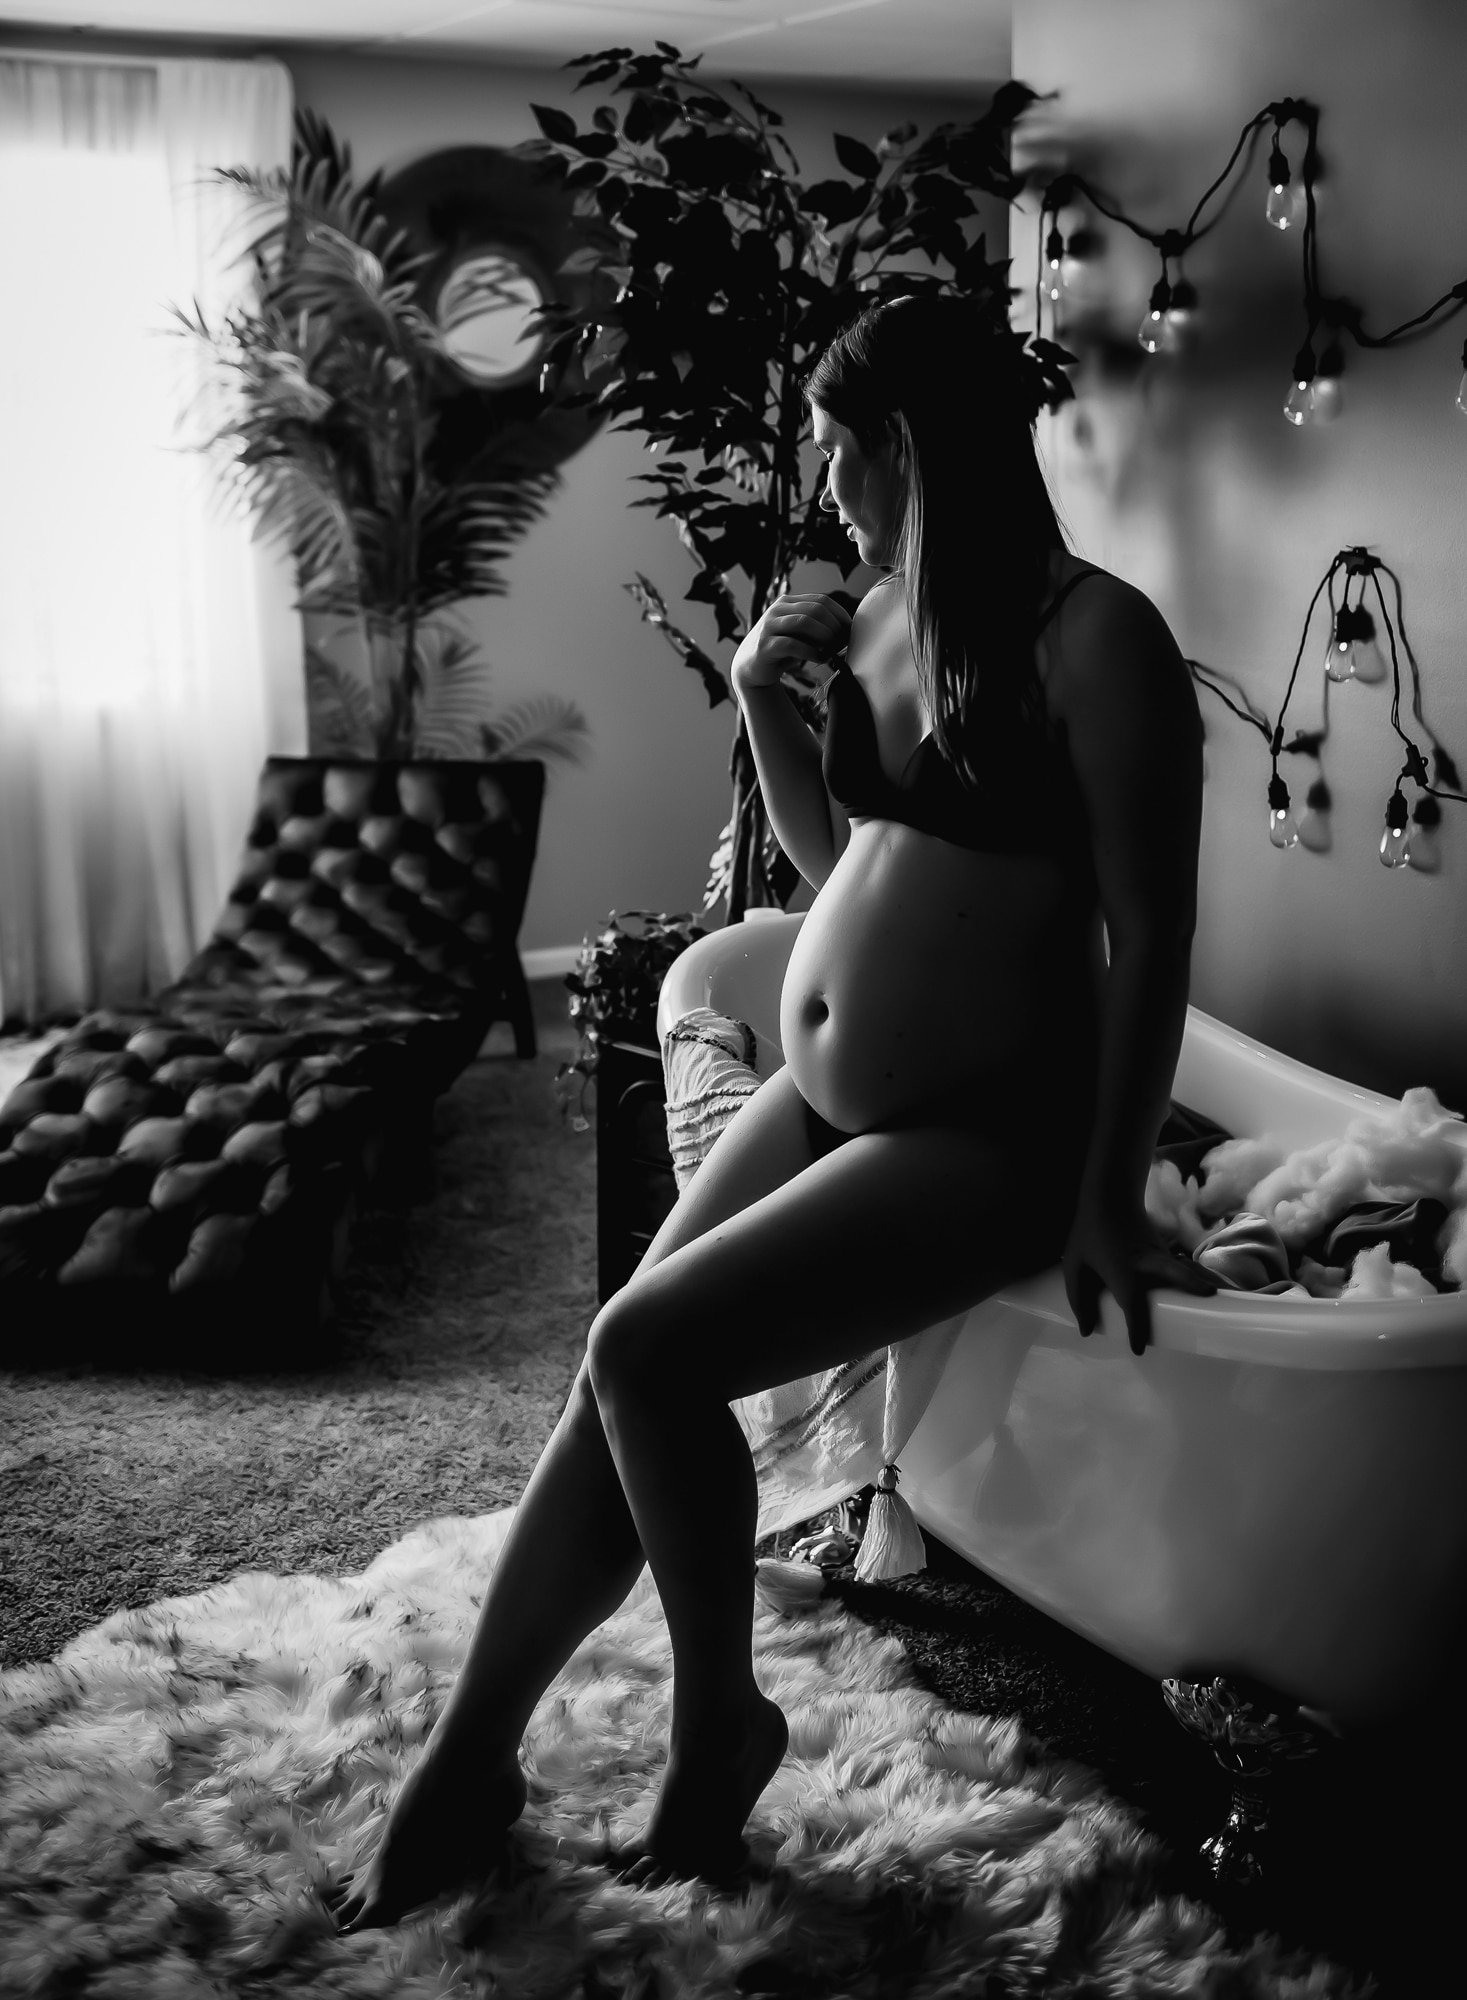 black-and-white-image-of-a-pregant-woman-sitting-on-edge-of-a-clawfoot-tub